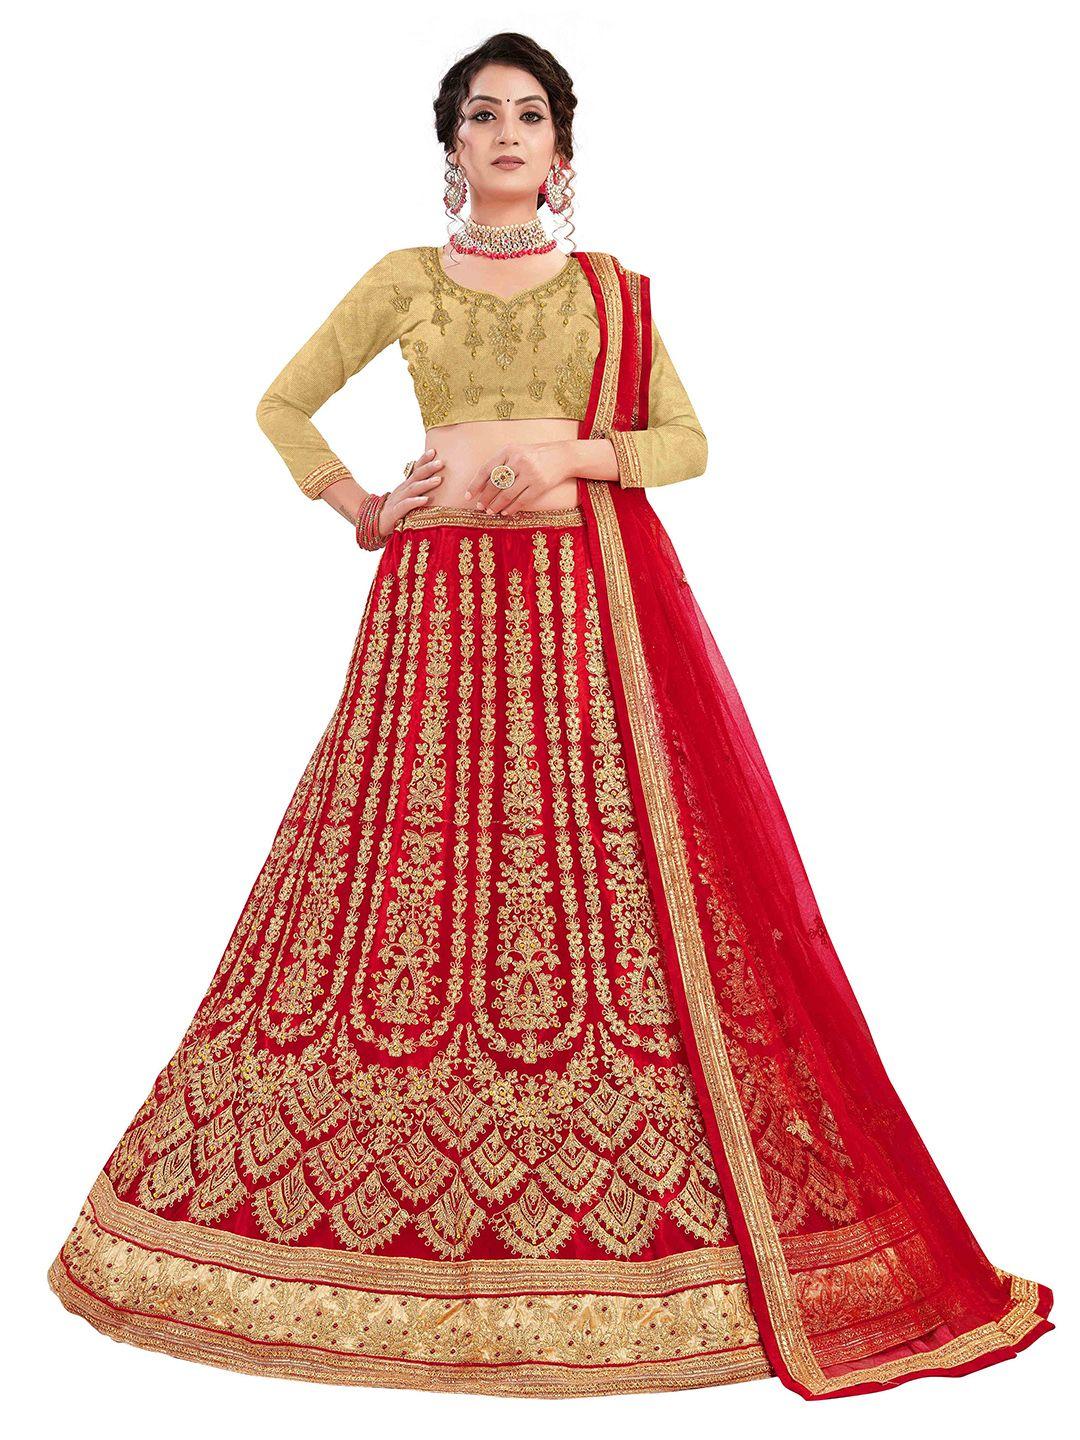 MANVAA Red & Beige Embroidered Thread Work Semi-Stitched Lehenga & Unstitched Blouse With Dupatta